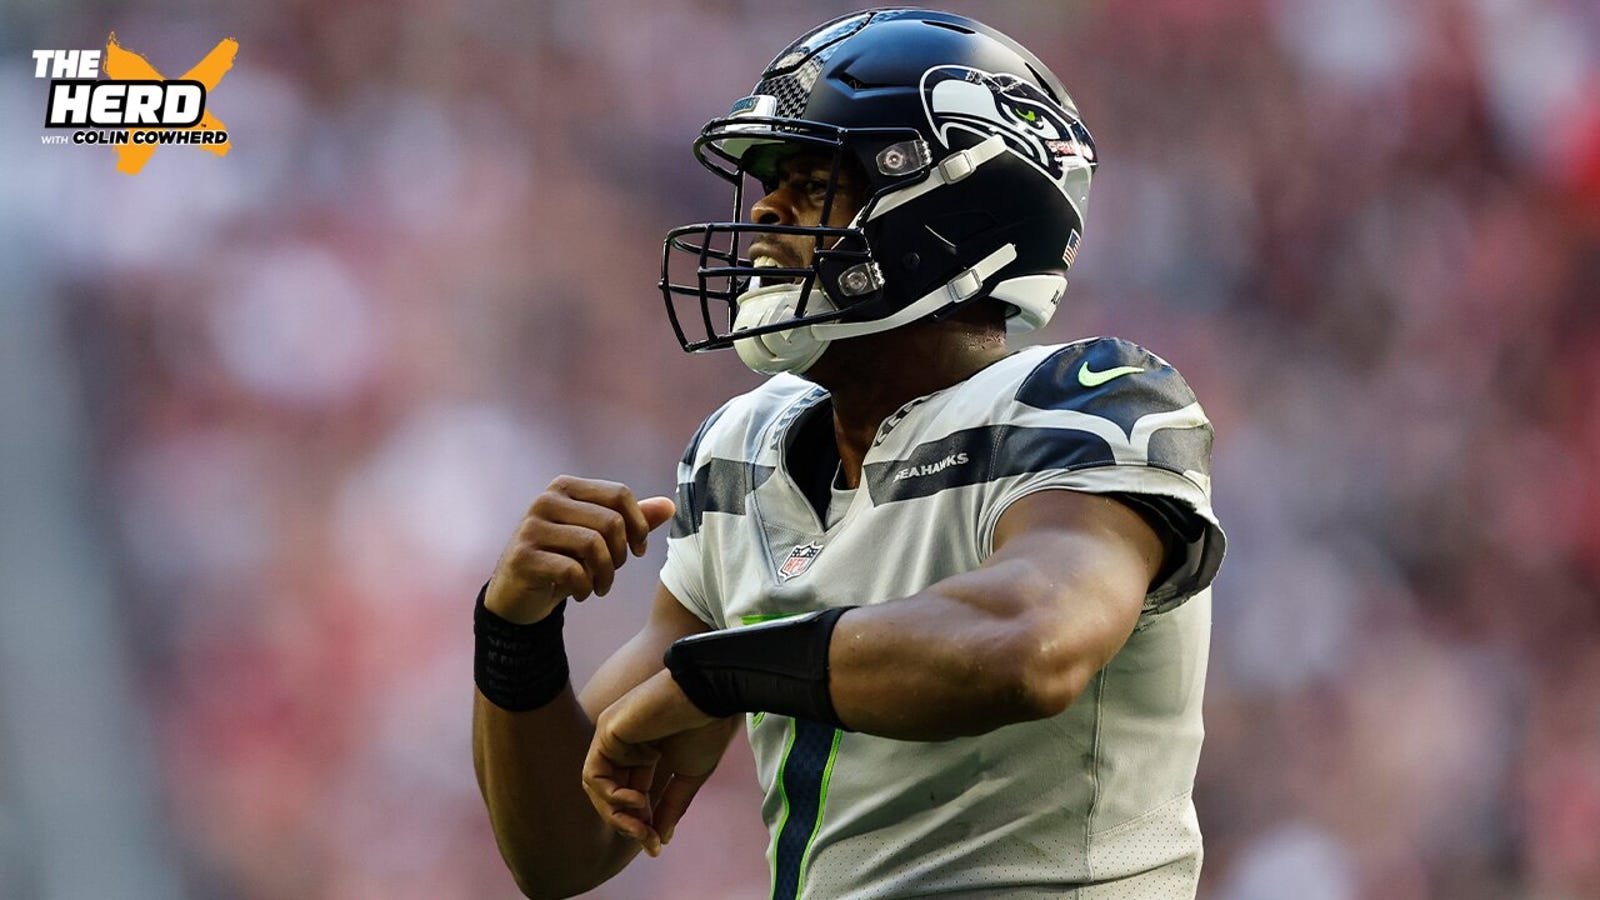 What makes Geno Smith, Seahawks unexpectedly successful this season